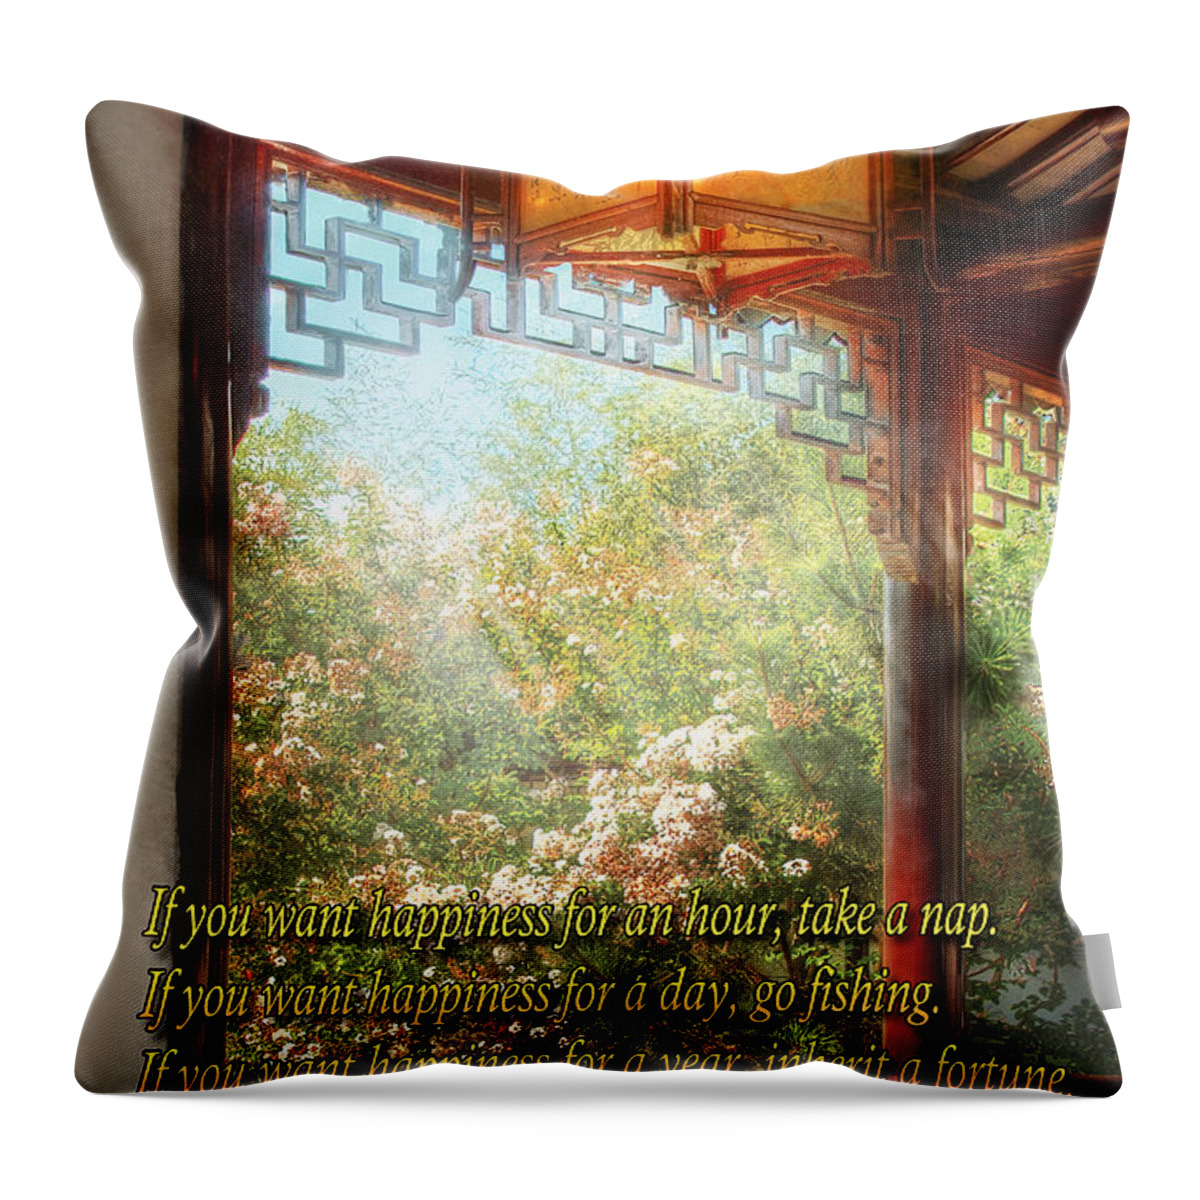 Chinese Throw Pillow featuring the photograph Inspirational - Happiness - Simply Chinese by Mike Savad